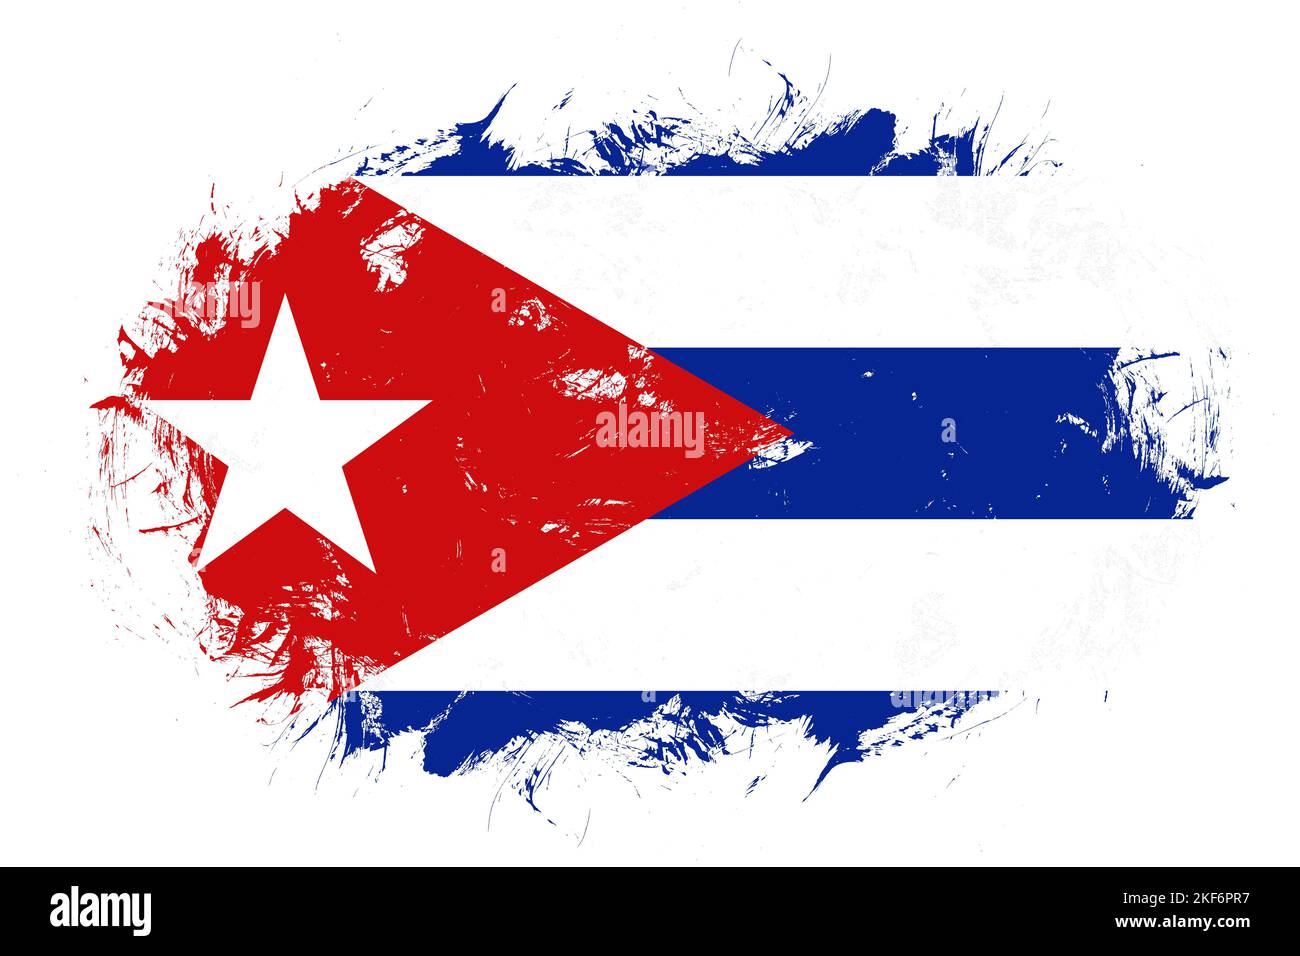 Cuba flag on abstract stroke brush background Stock Photo